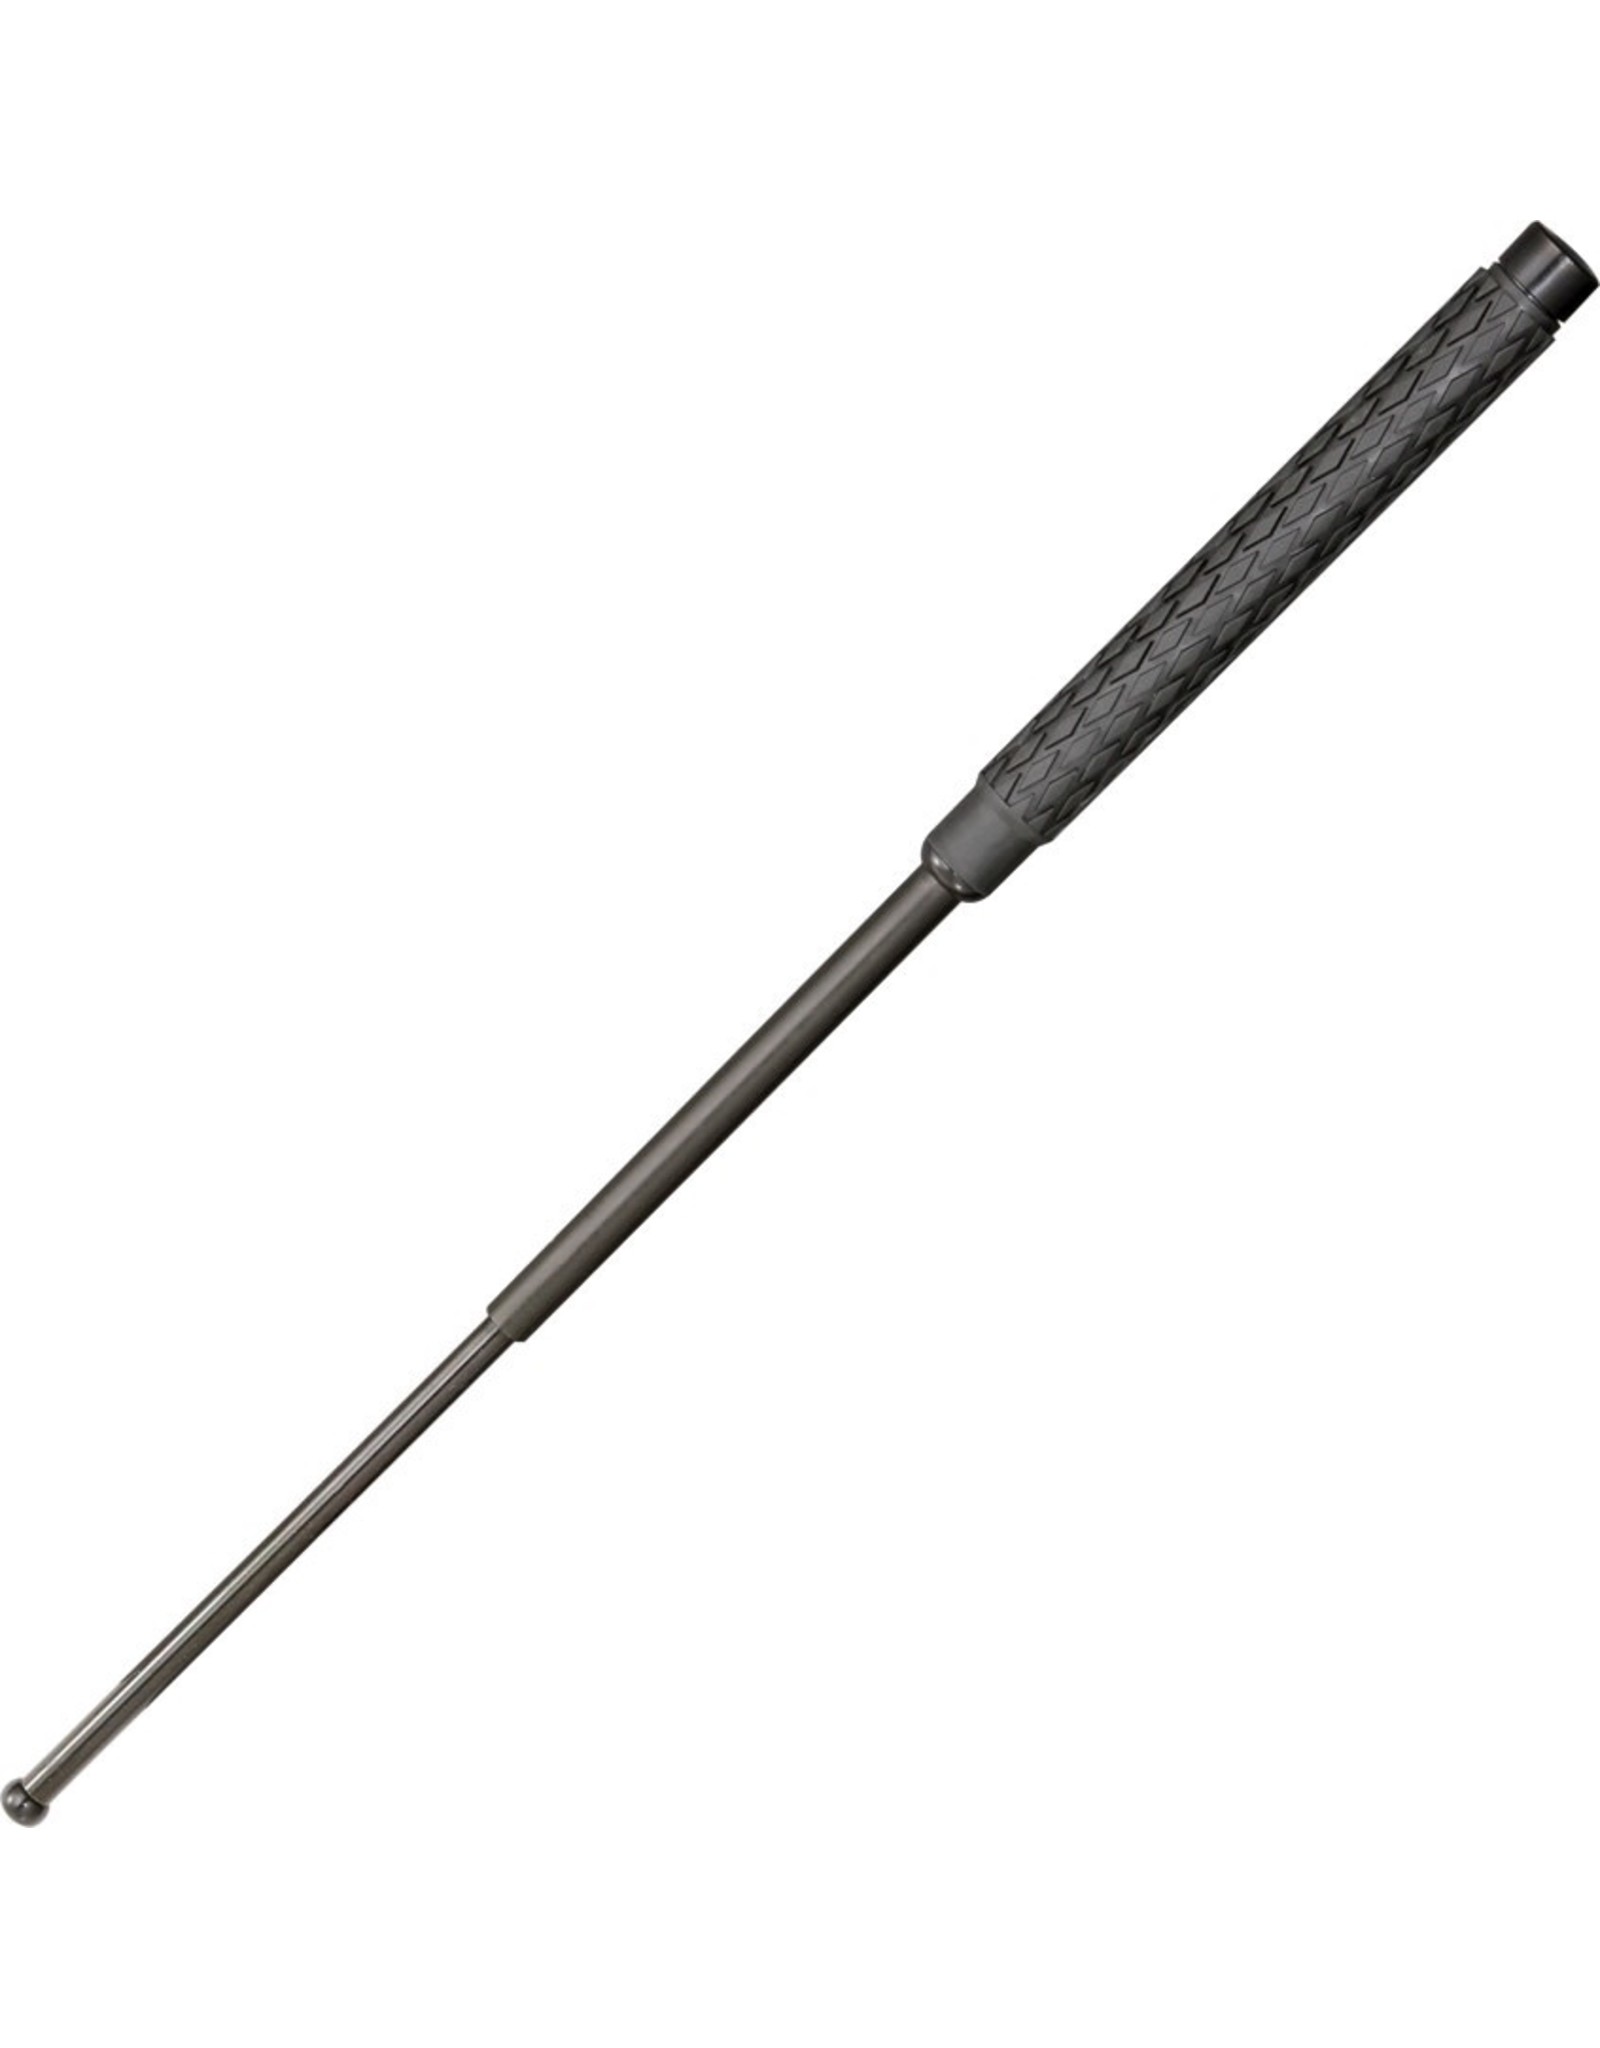 Scorpion Defence Products Kwik Force  26" Solid Steel Expandable Baton, Nylon Pouch - 220032-26